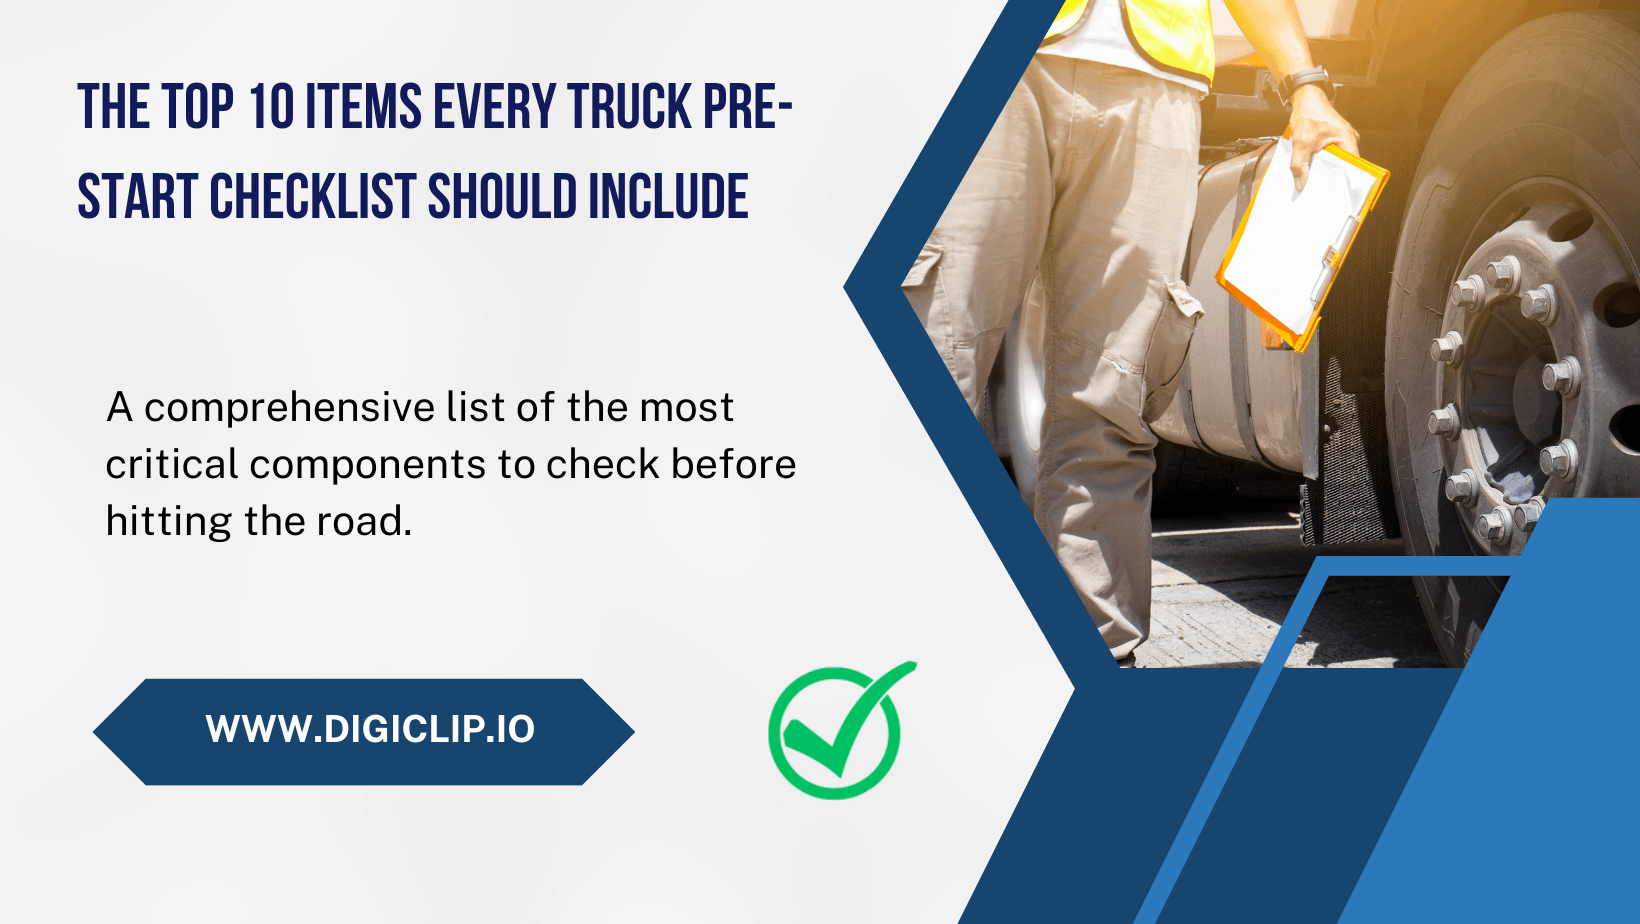 The Top 10 Items Every Truck Pre-Start Checklist Should Include